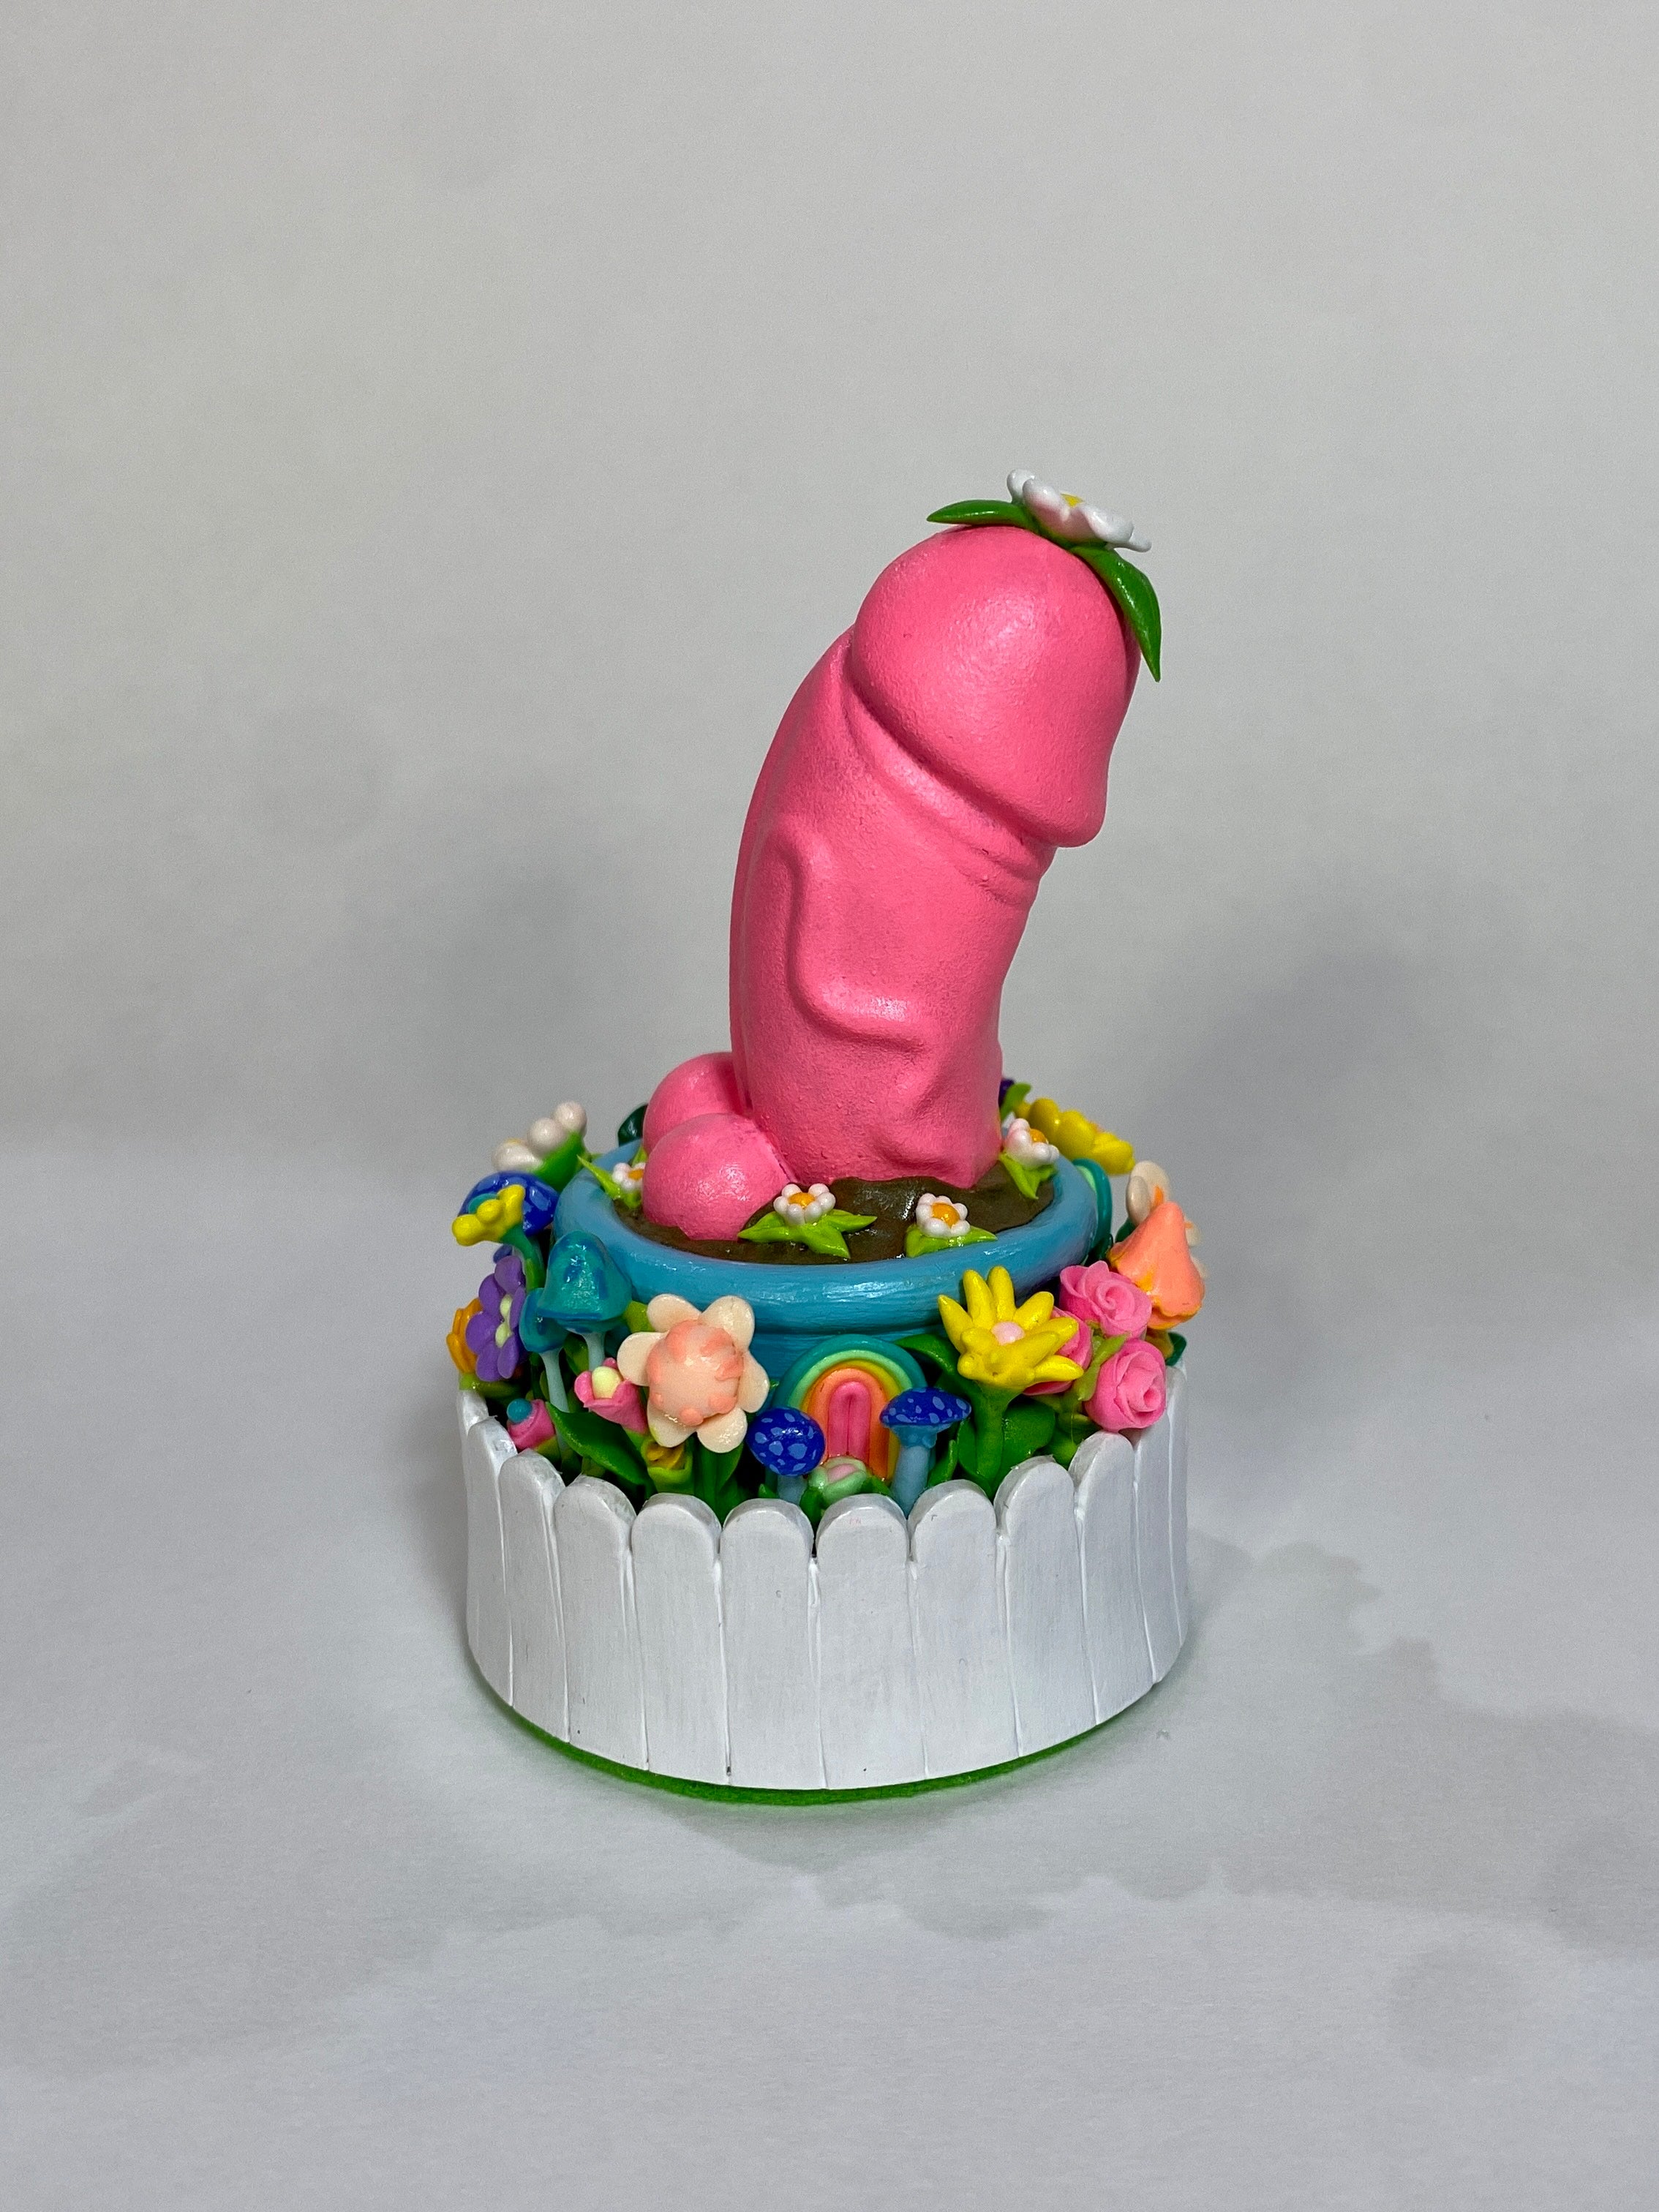 Toy cake topper with pink animal, yellow flower candy, and blue mushroom on cake.